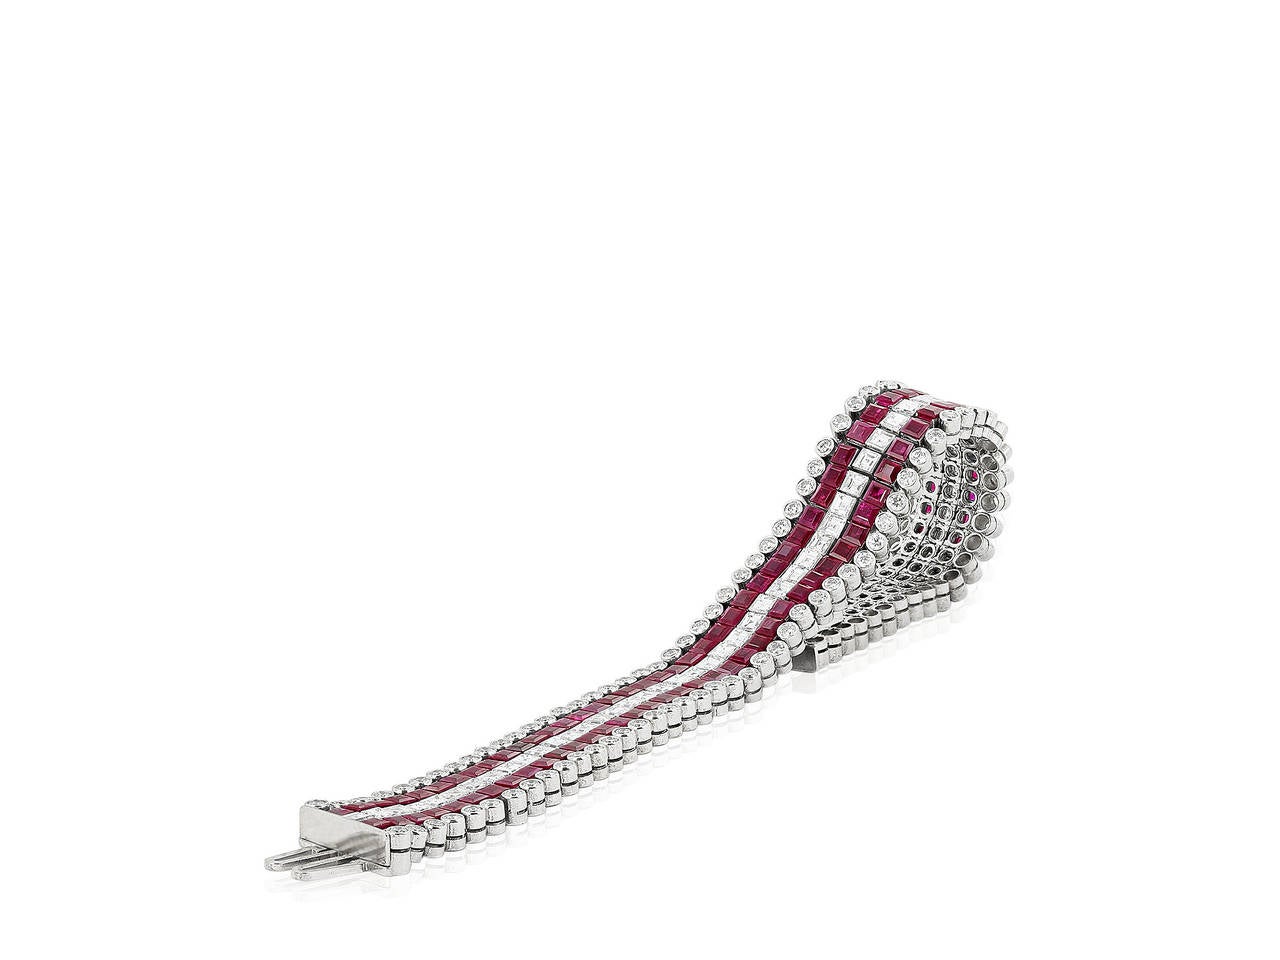 Platinum 5 row flexible bracelet consisting of 116 invisible set square cut rubies having a total weight of 30.00 carats set with 58 square cut diamonds and 116 bezel set round brilliant cut diamonds having a total weight of 14.20 carats.  Signed